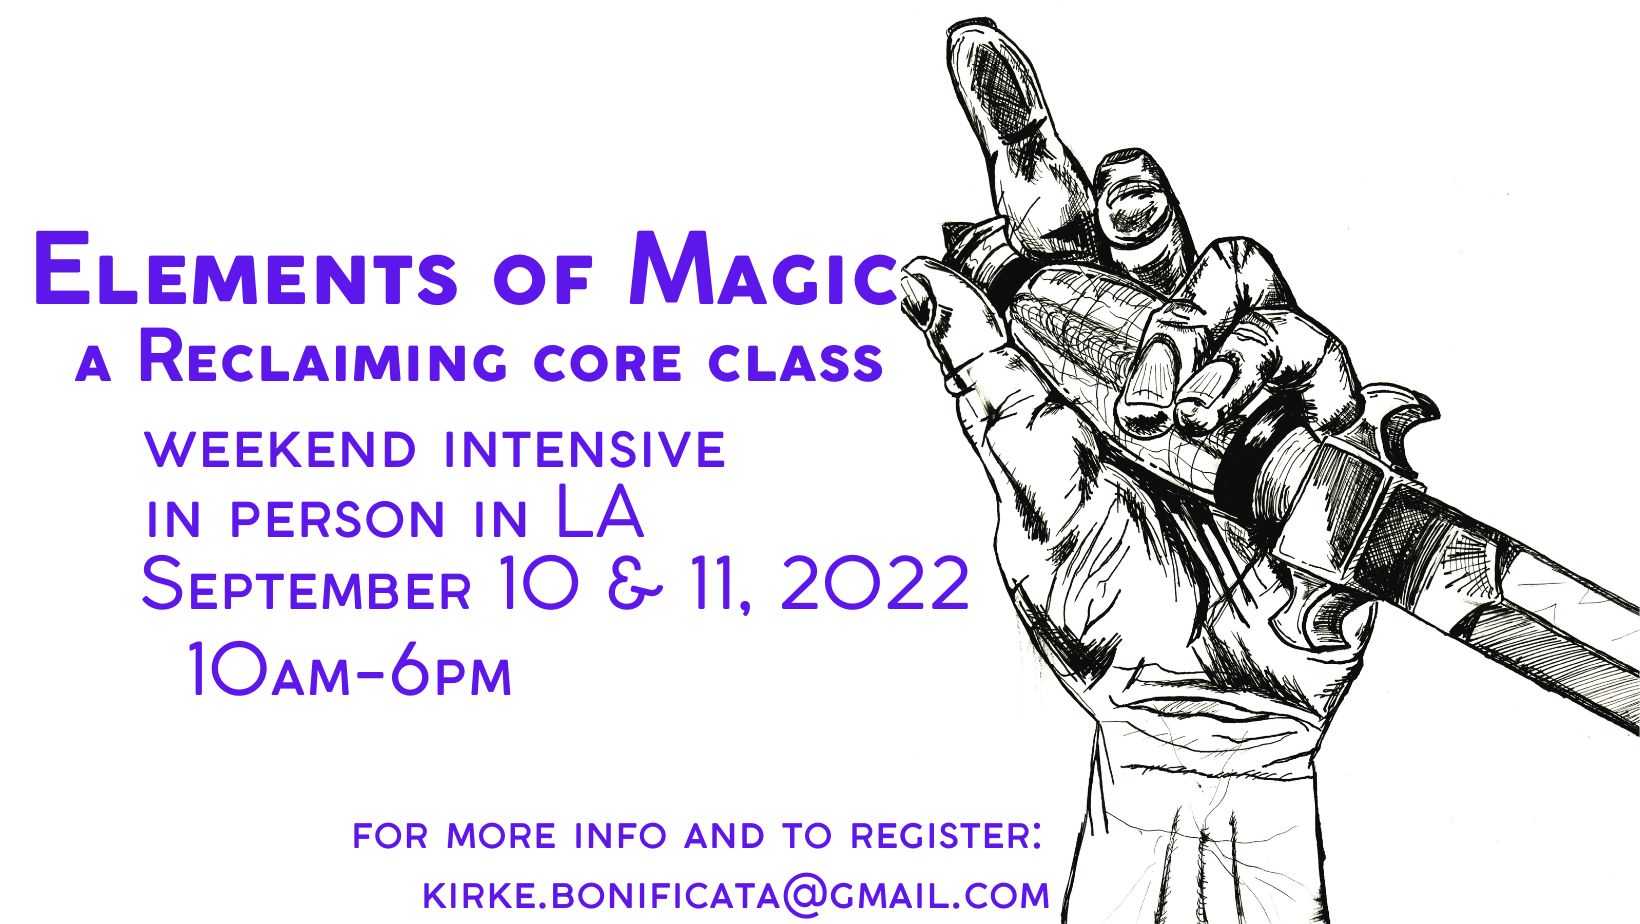 A scratchy ink drawing of a hand holding a ceremonial athame. Purple text overlay reads: "Elements of Magic: a Reclaiming Core Class. Weekend intensive in person in LA. September 10 & 11, 2022. 10AM-6PM. For more info and to register: kirke.bonificata@gmail.com."